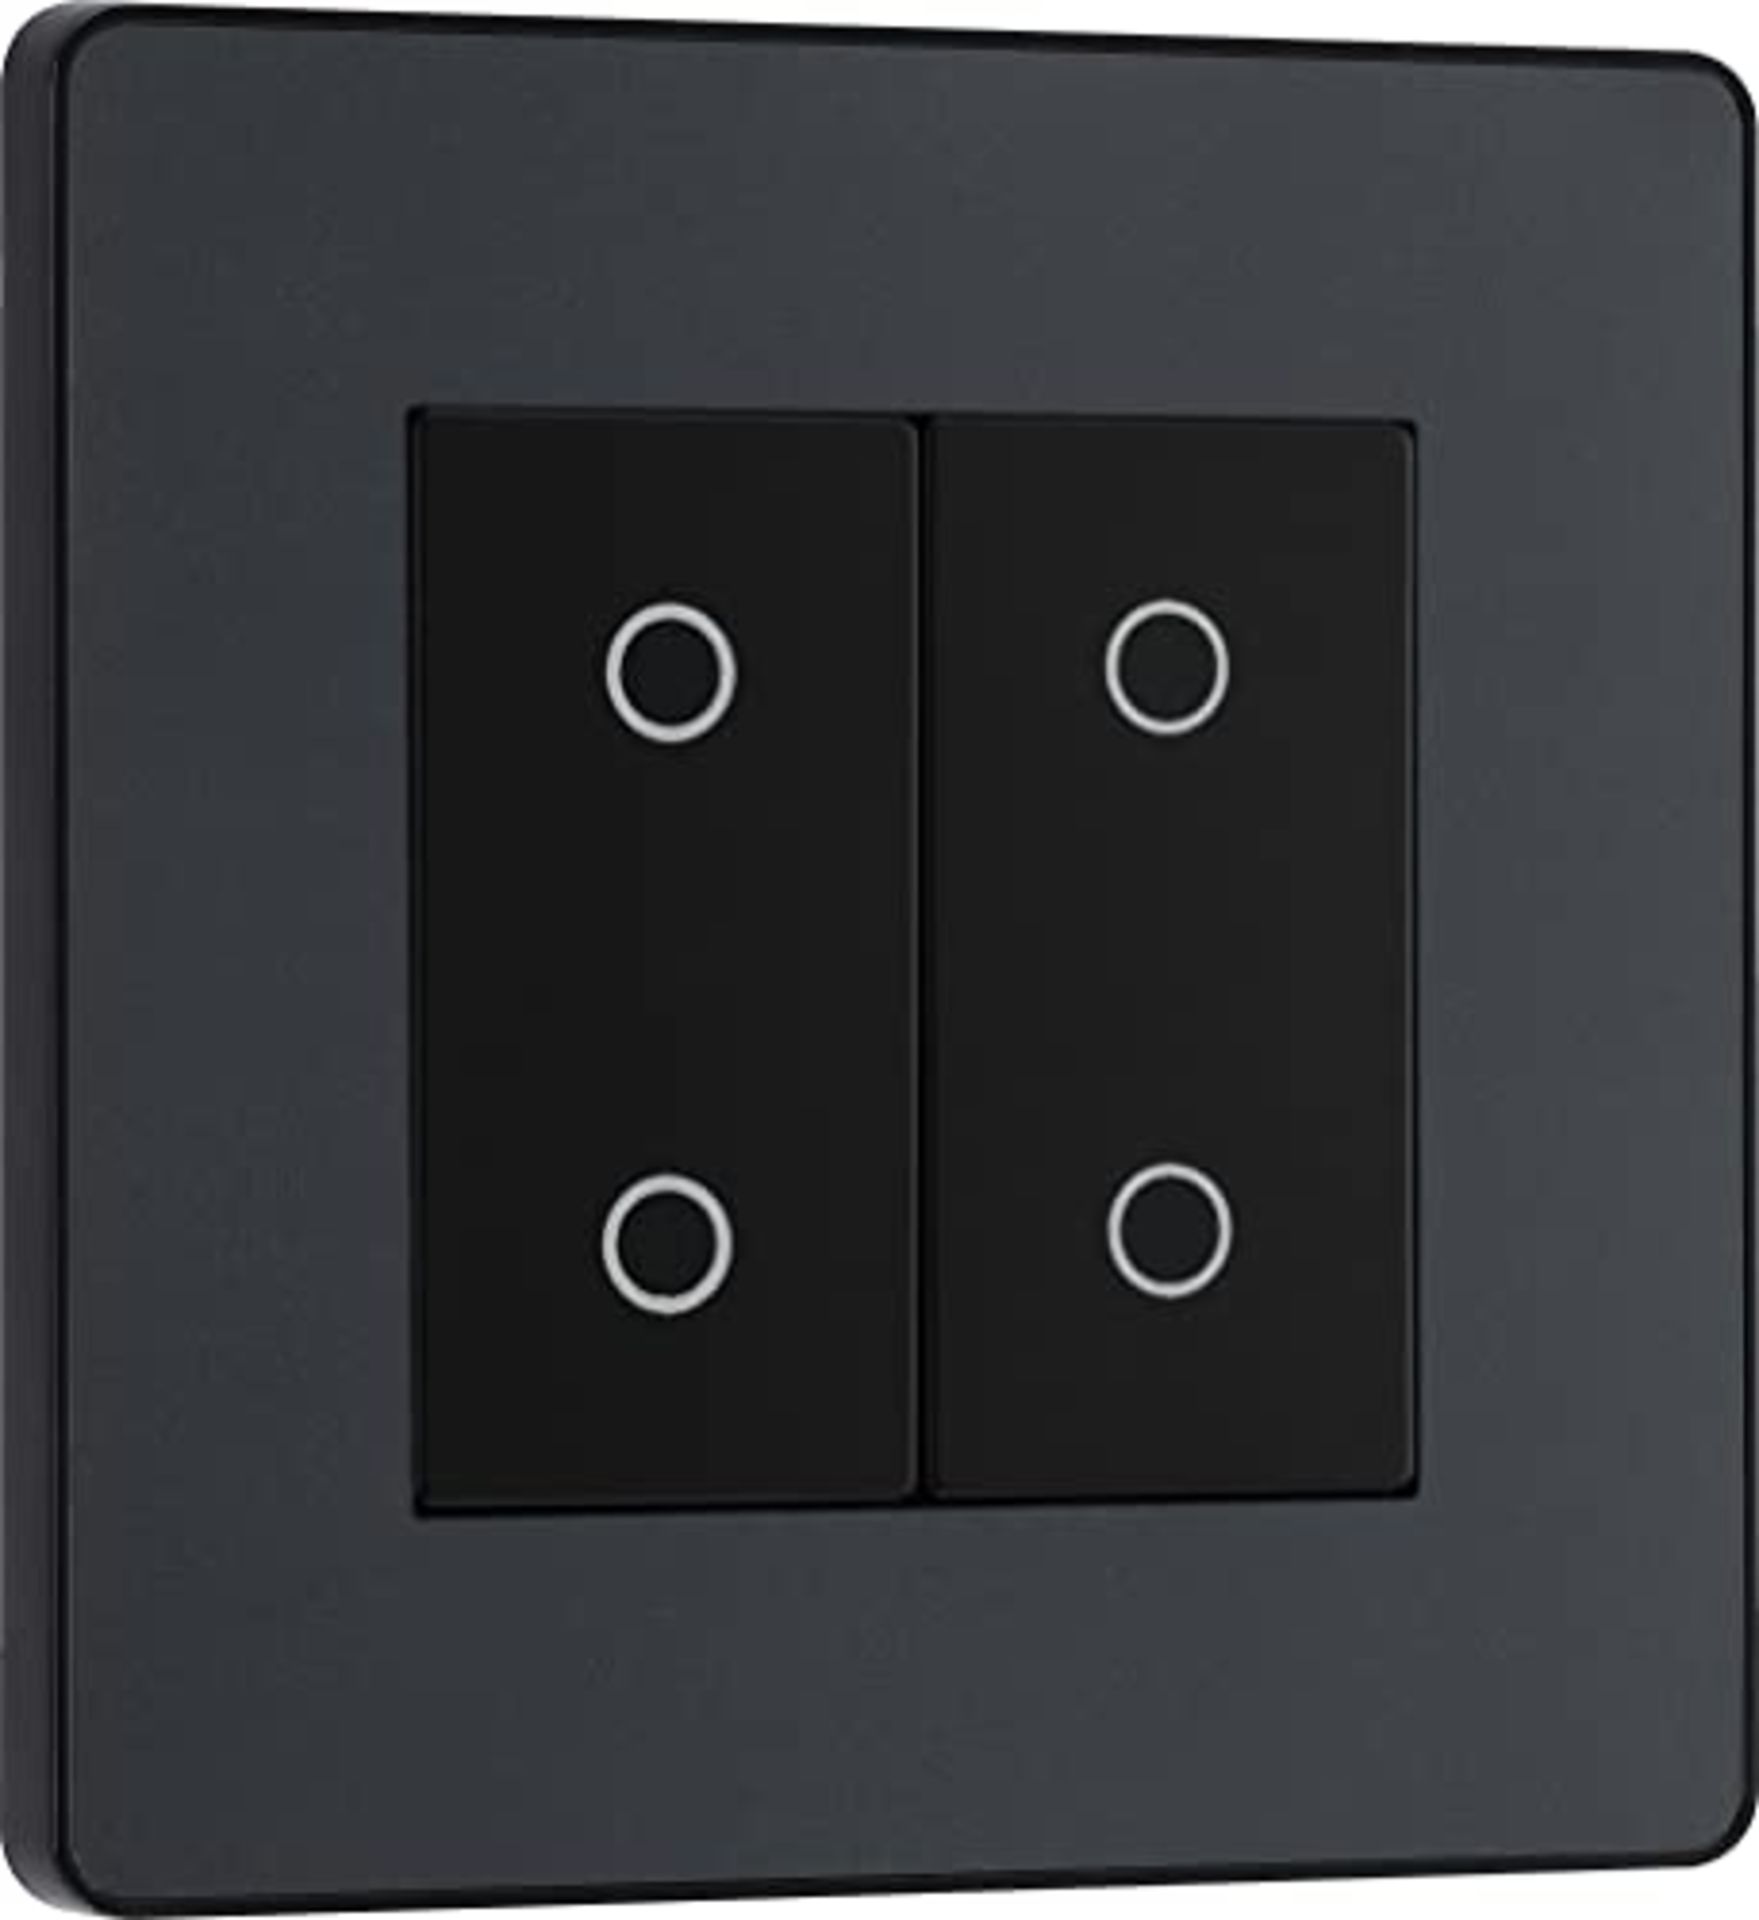 BG Electrical Evolve Double Touch Dimmer Switch, 2-Way Master, 200W, Matt Grey